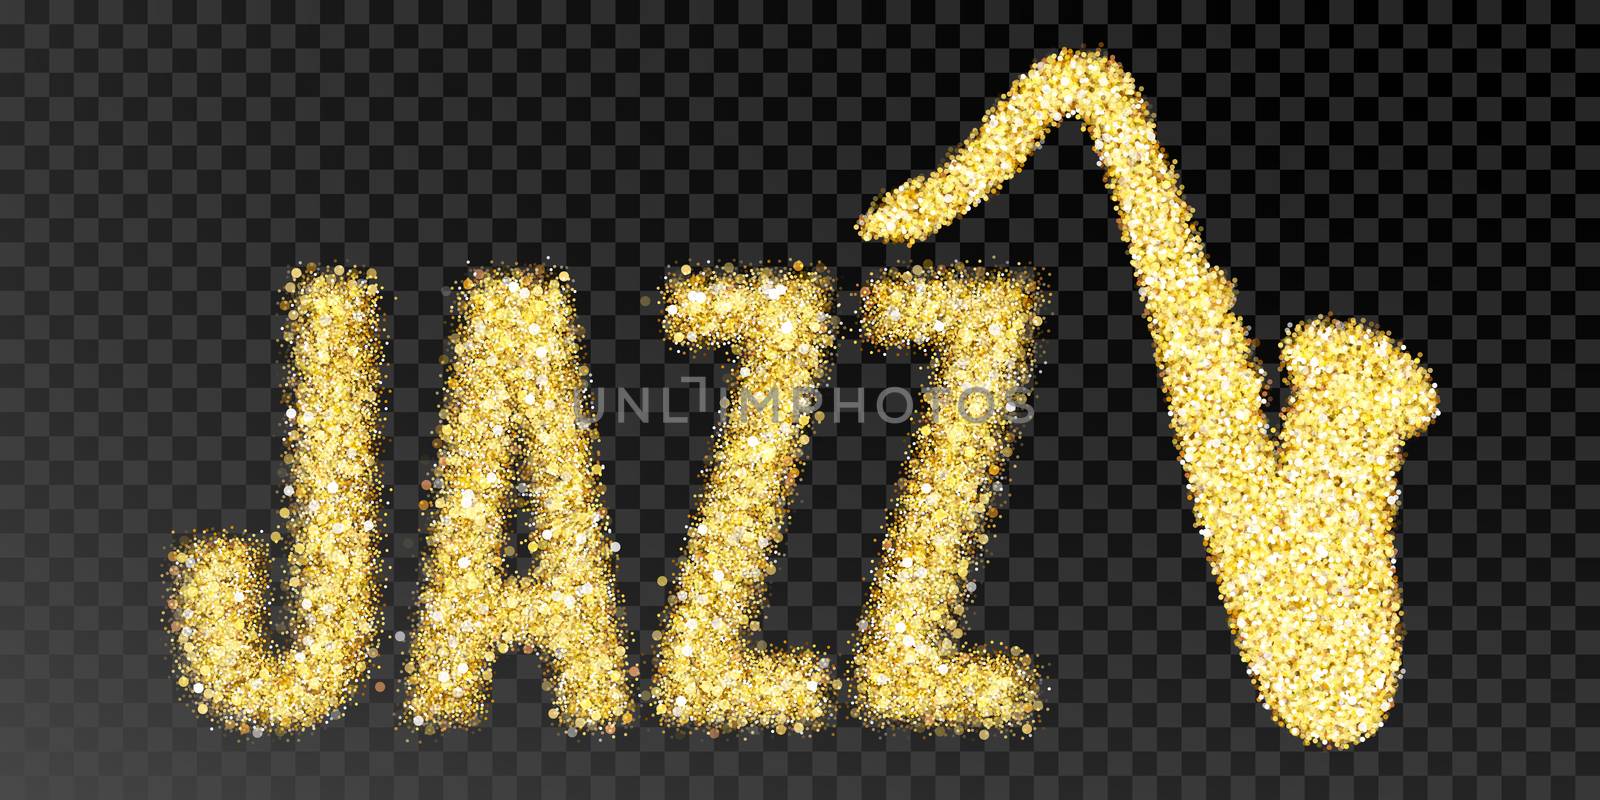 Gold glitter Inscription jazz and saxophone. Golden sparcle word jazz on black transparent background. Amber particles gold confetti. by Elena_Garder